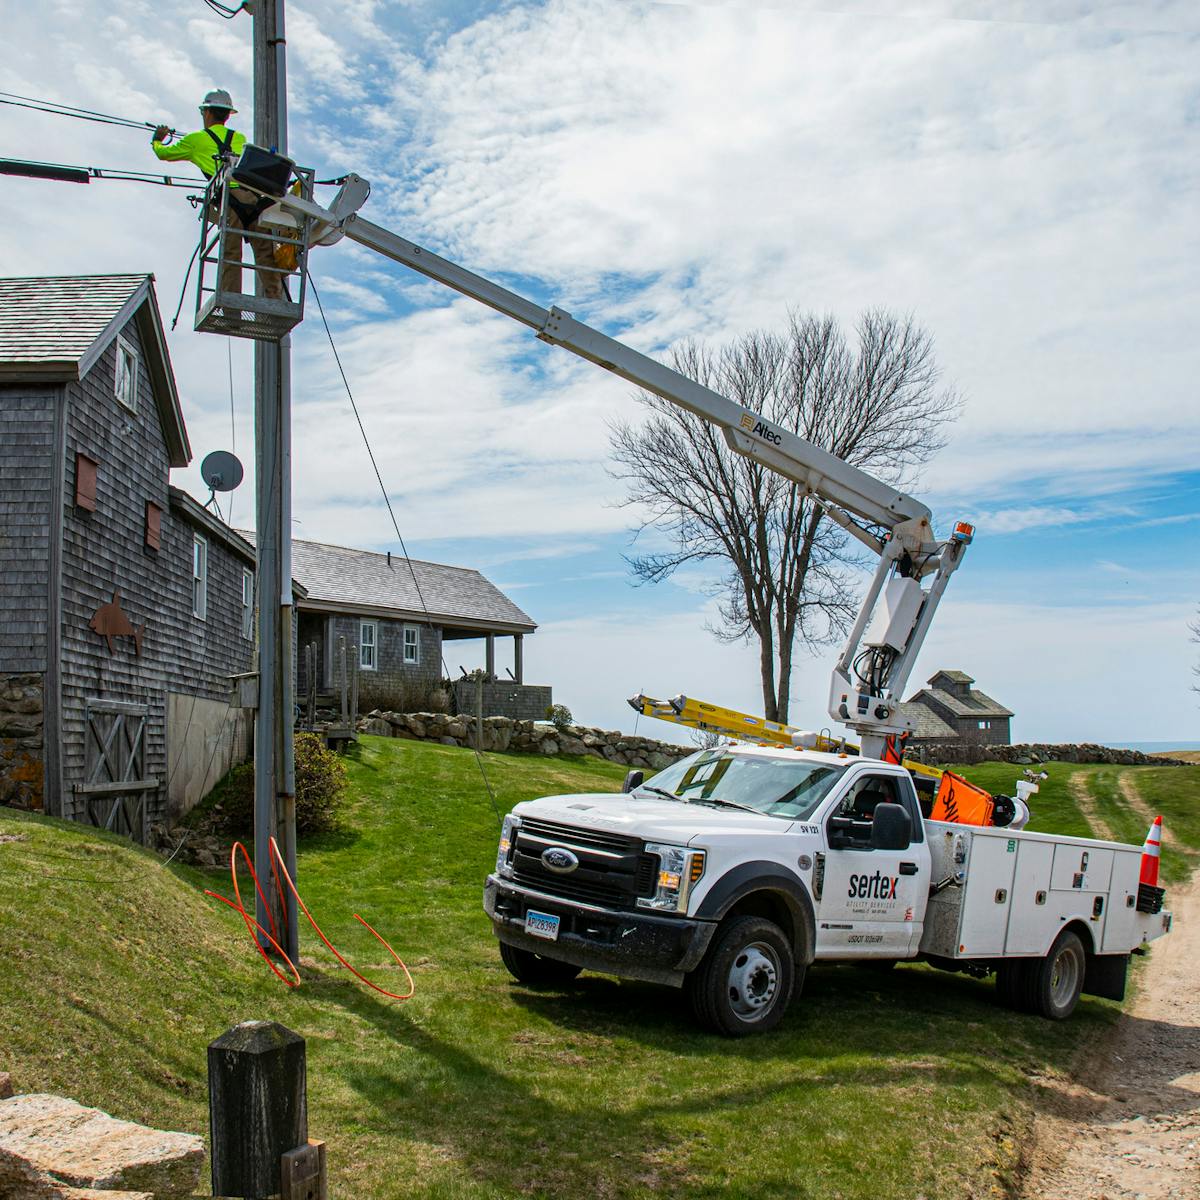 New Shoreham, RI, located on Block Island, RI, has lit a fully self-funded FTTH network.